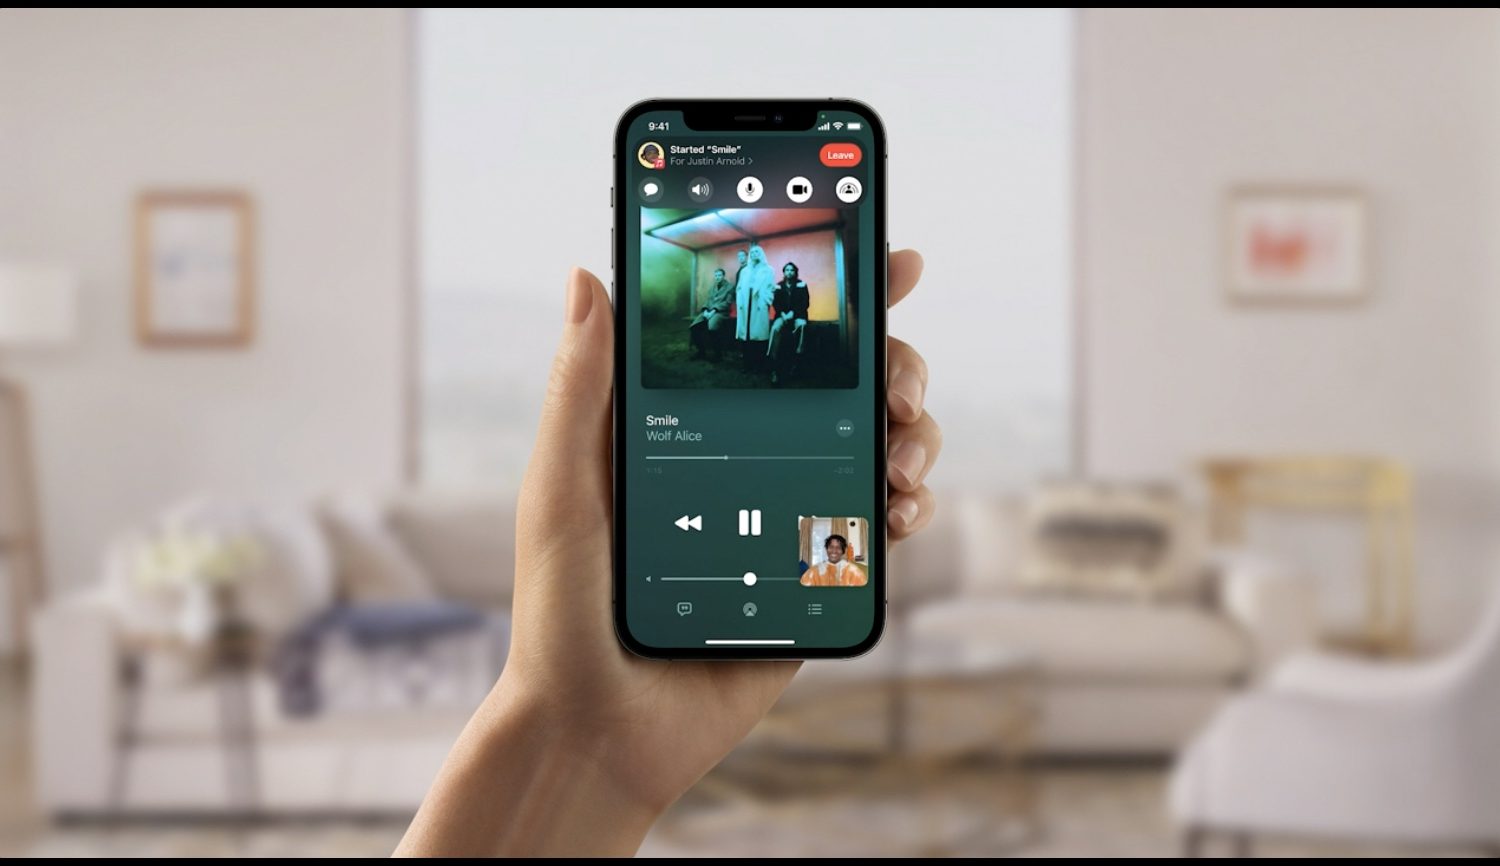 Apple's marketing image for SharePlay on iPhone showing shared media playing during FaceTime video call